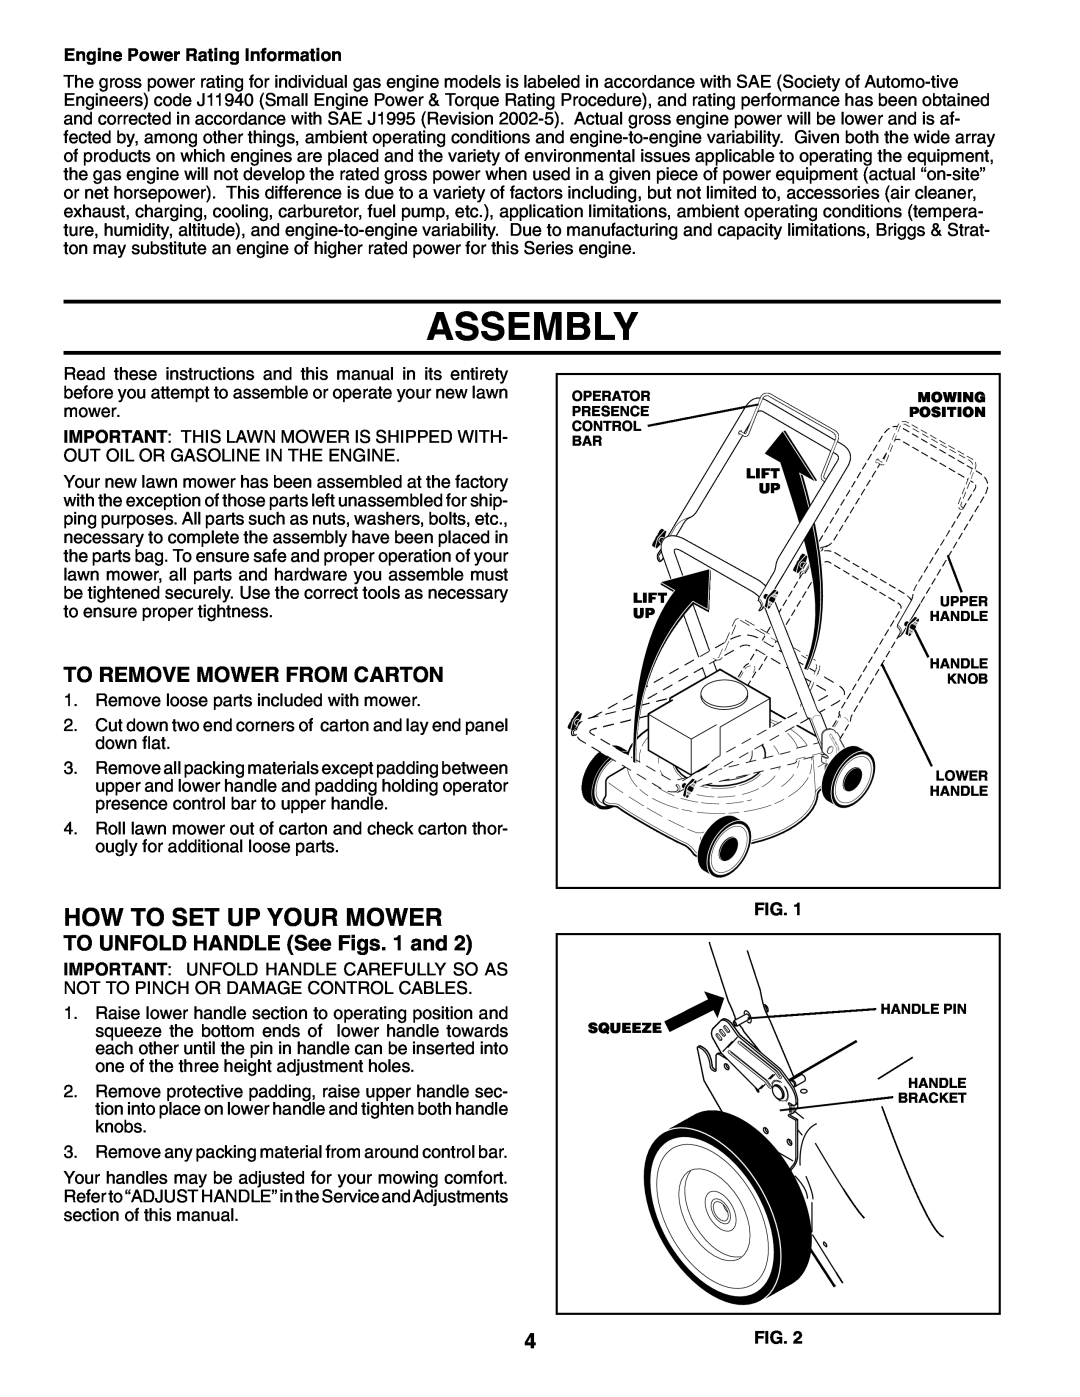 Husqvarna 87521RES Assembly, How To Set Up Your Mower, To Remove Mower From Carton, TO UNFOLD HANDLE See Figs. 1 and 